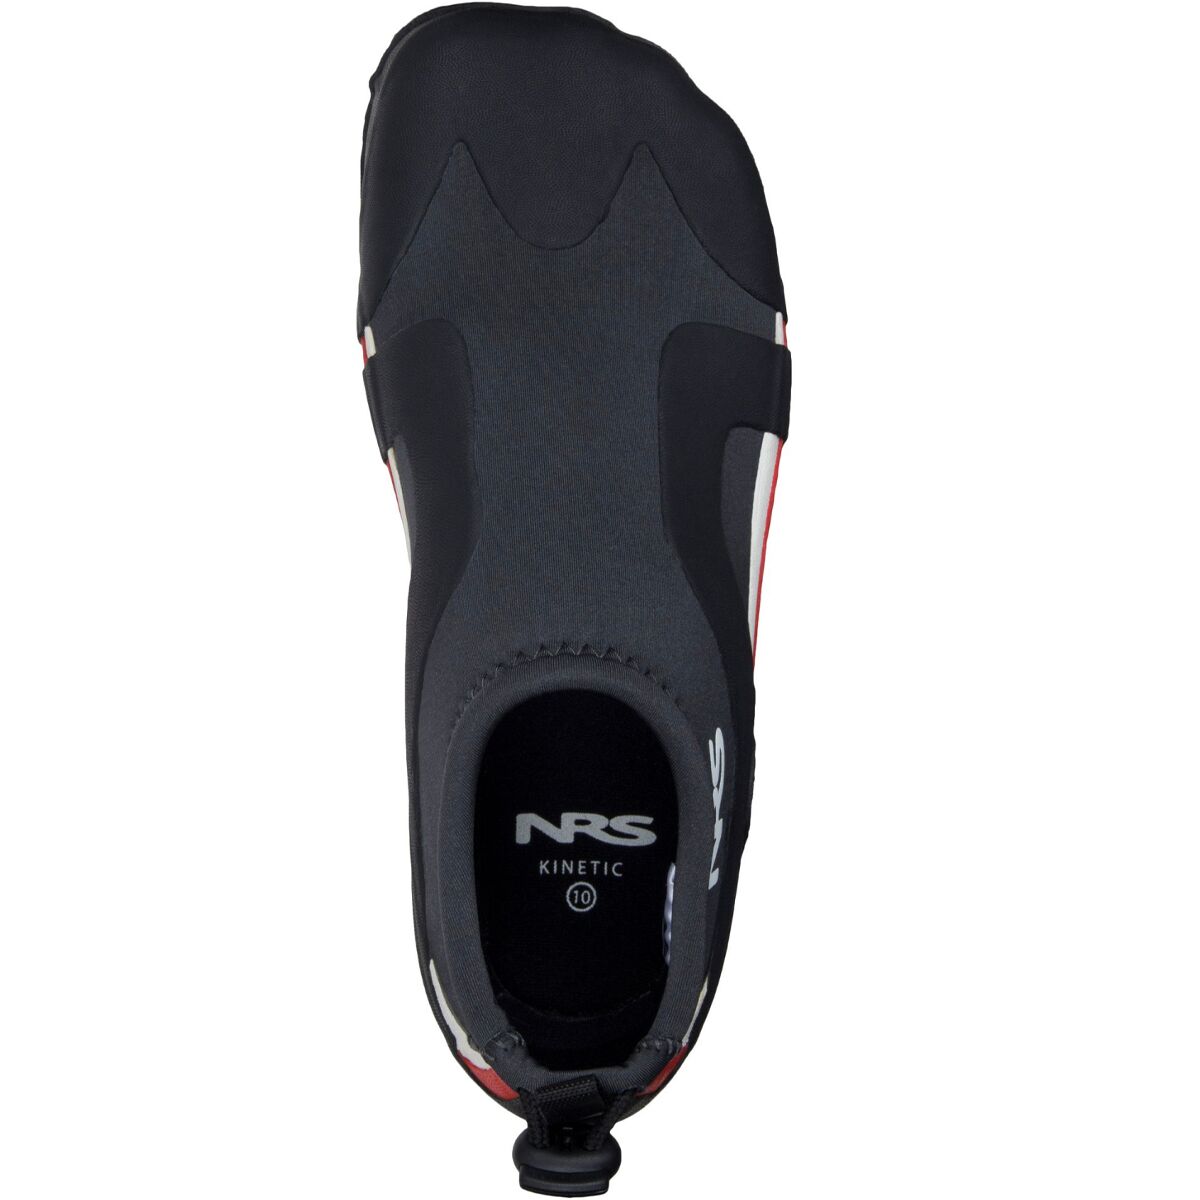 NRS Kinetic Water Shoe - Paddle